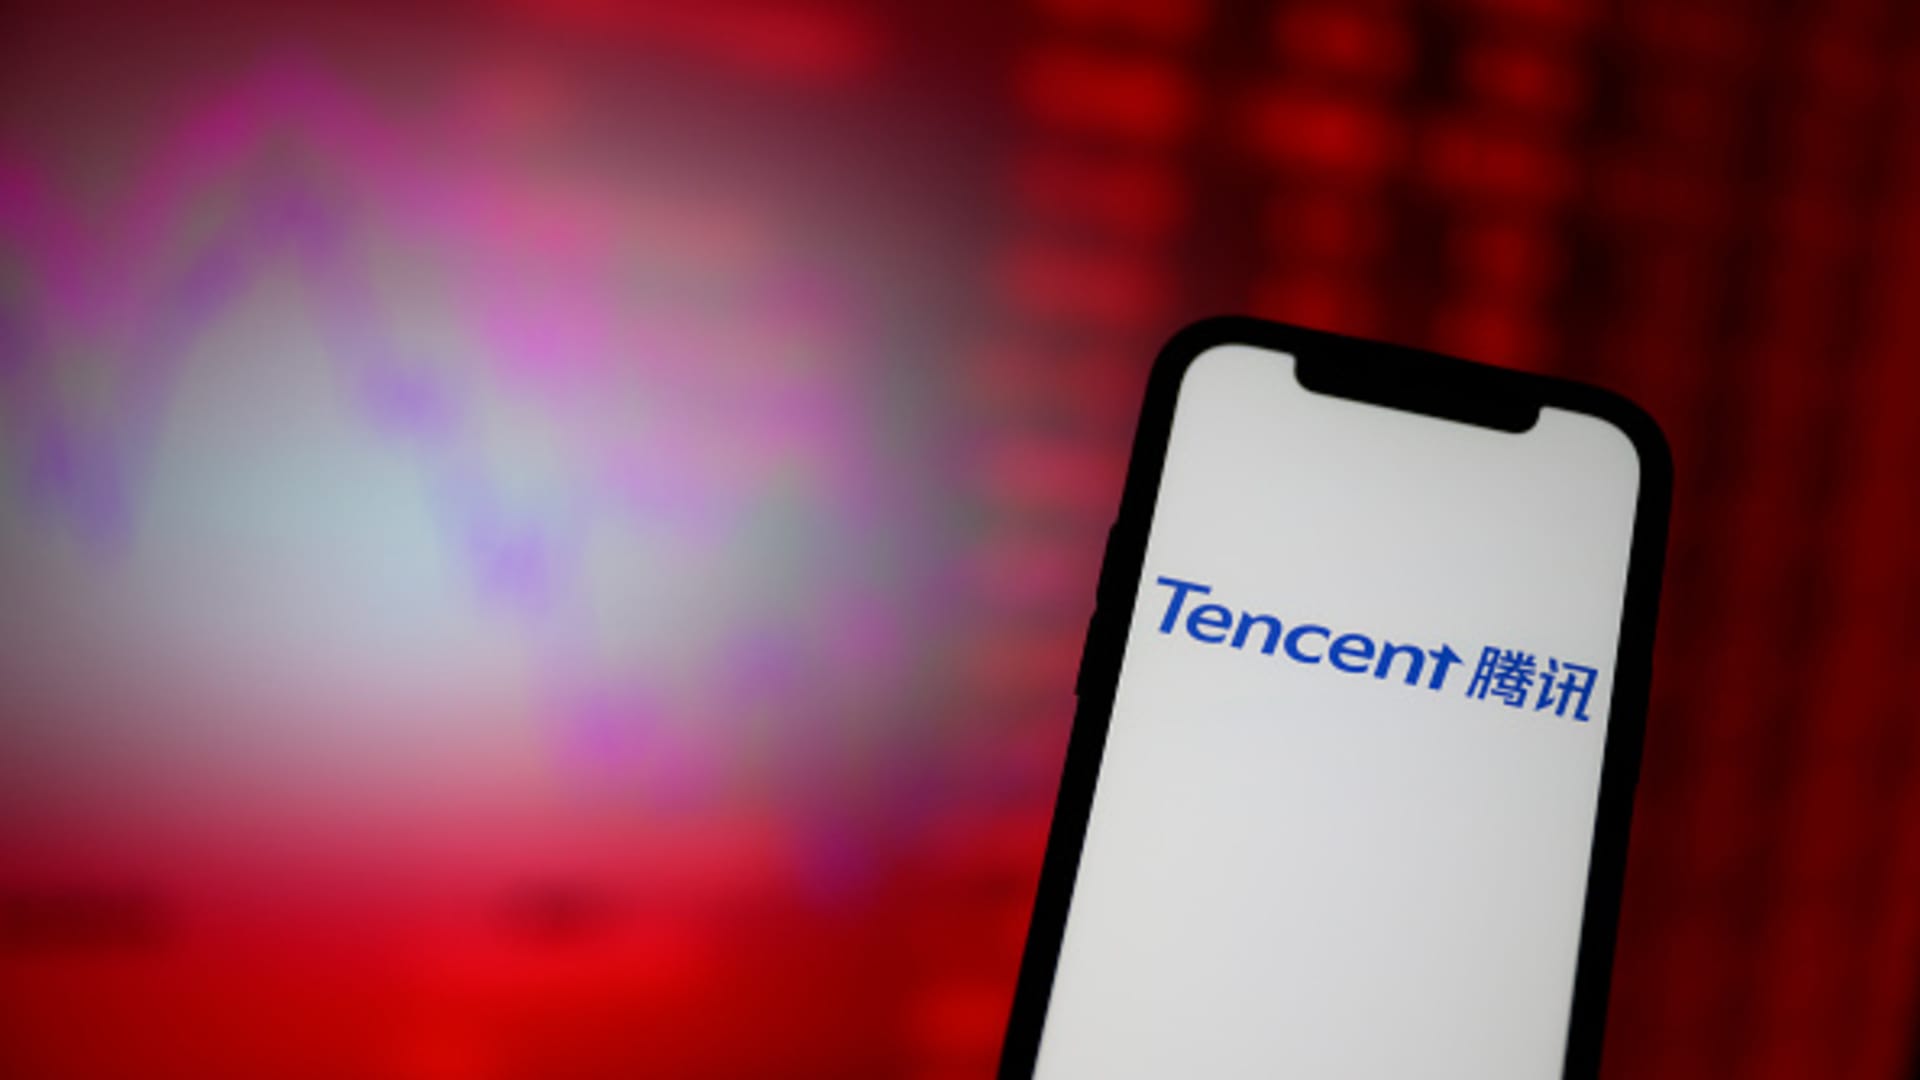 Tencent’s online ad revenue grows for the first time in more than a year